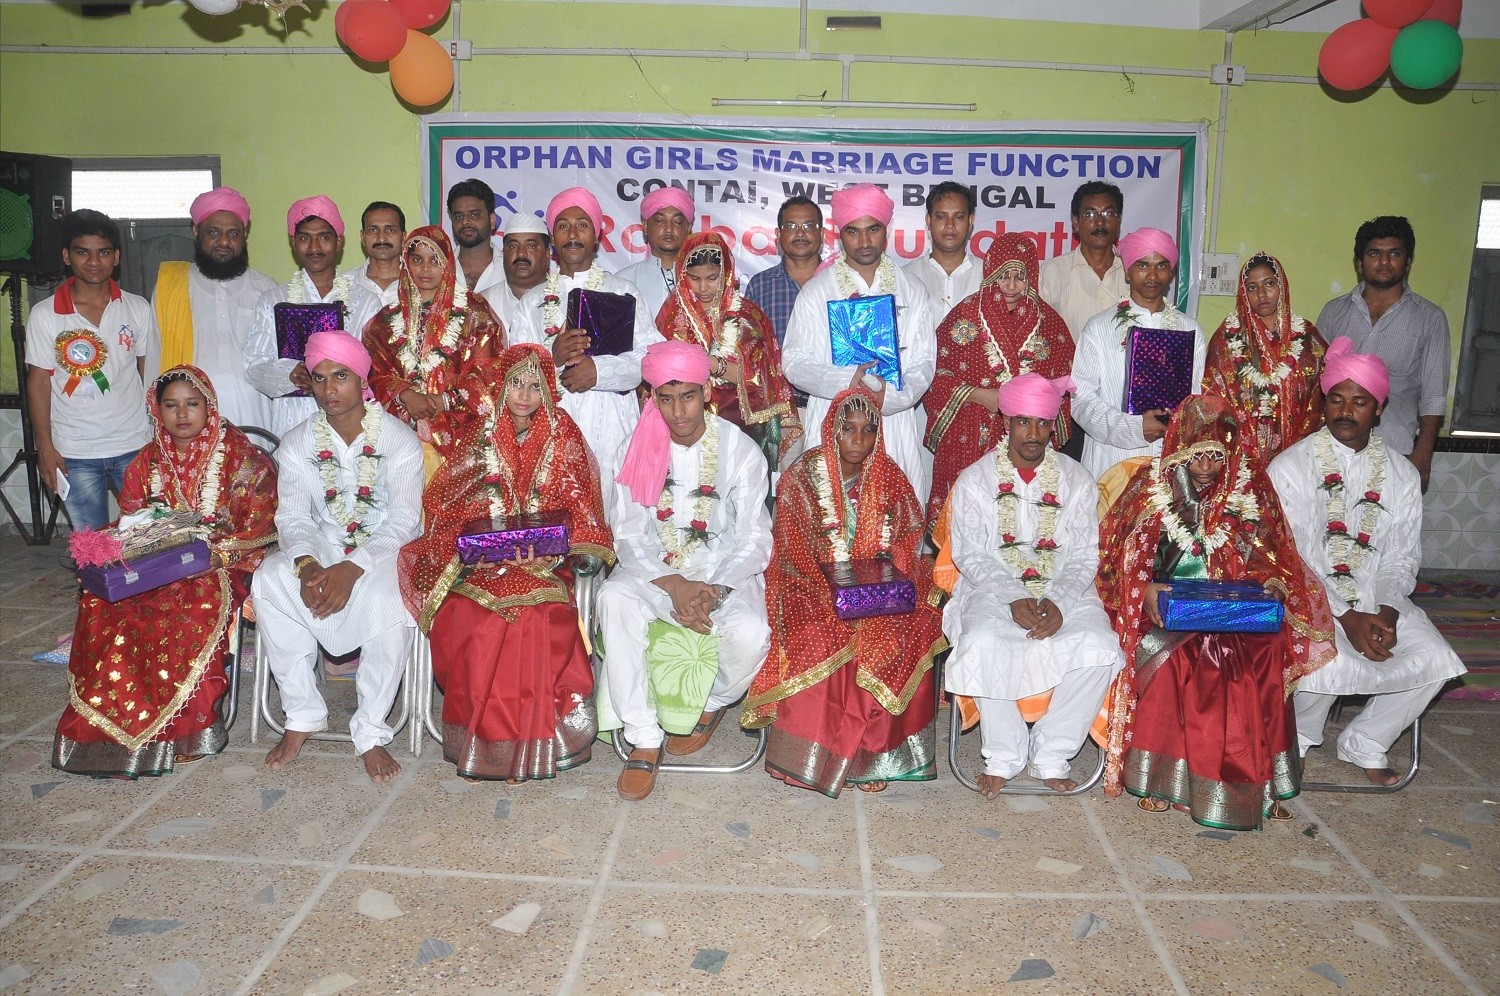 Orphan Girls Marriages at Contai in West Bengal, India